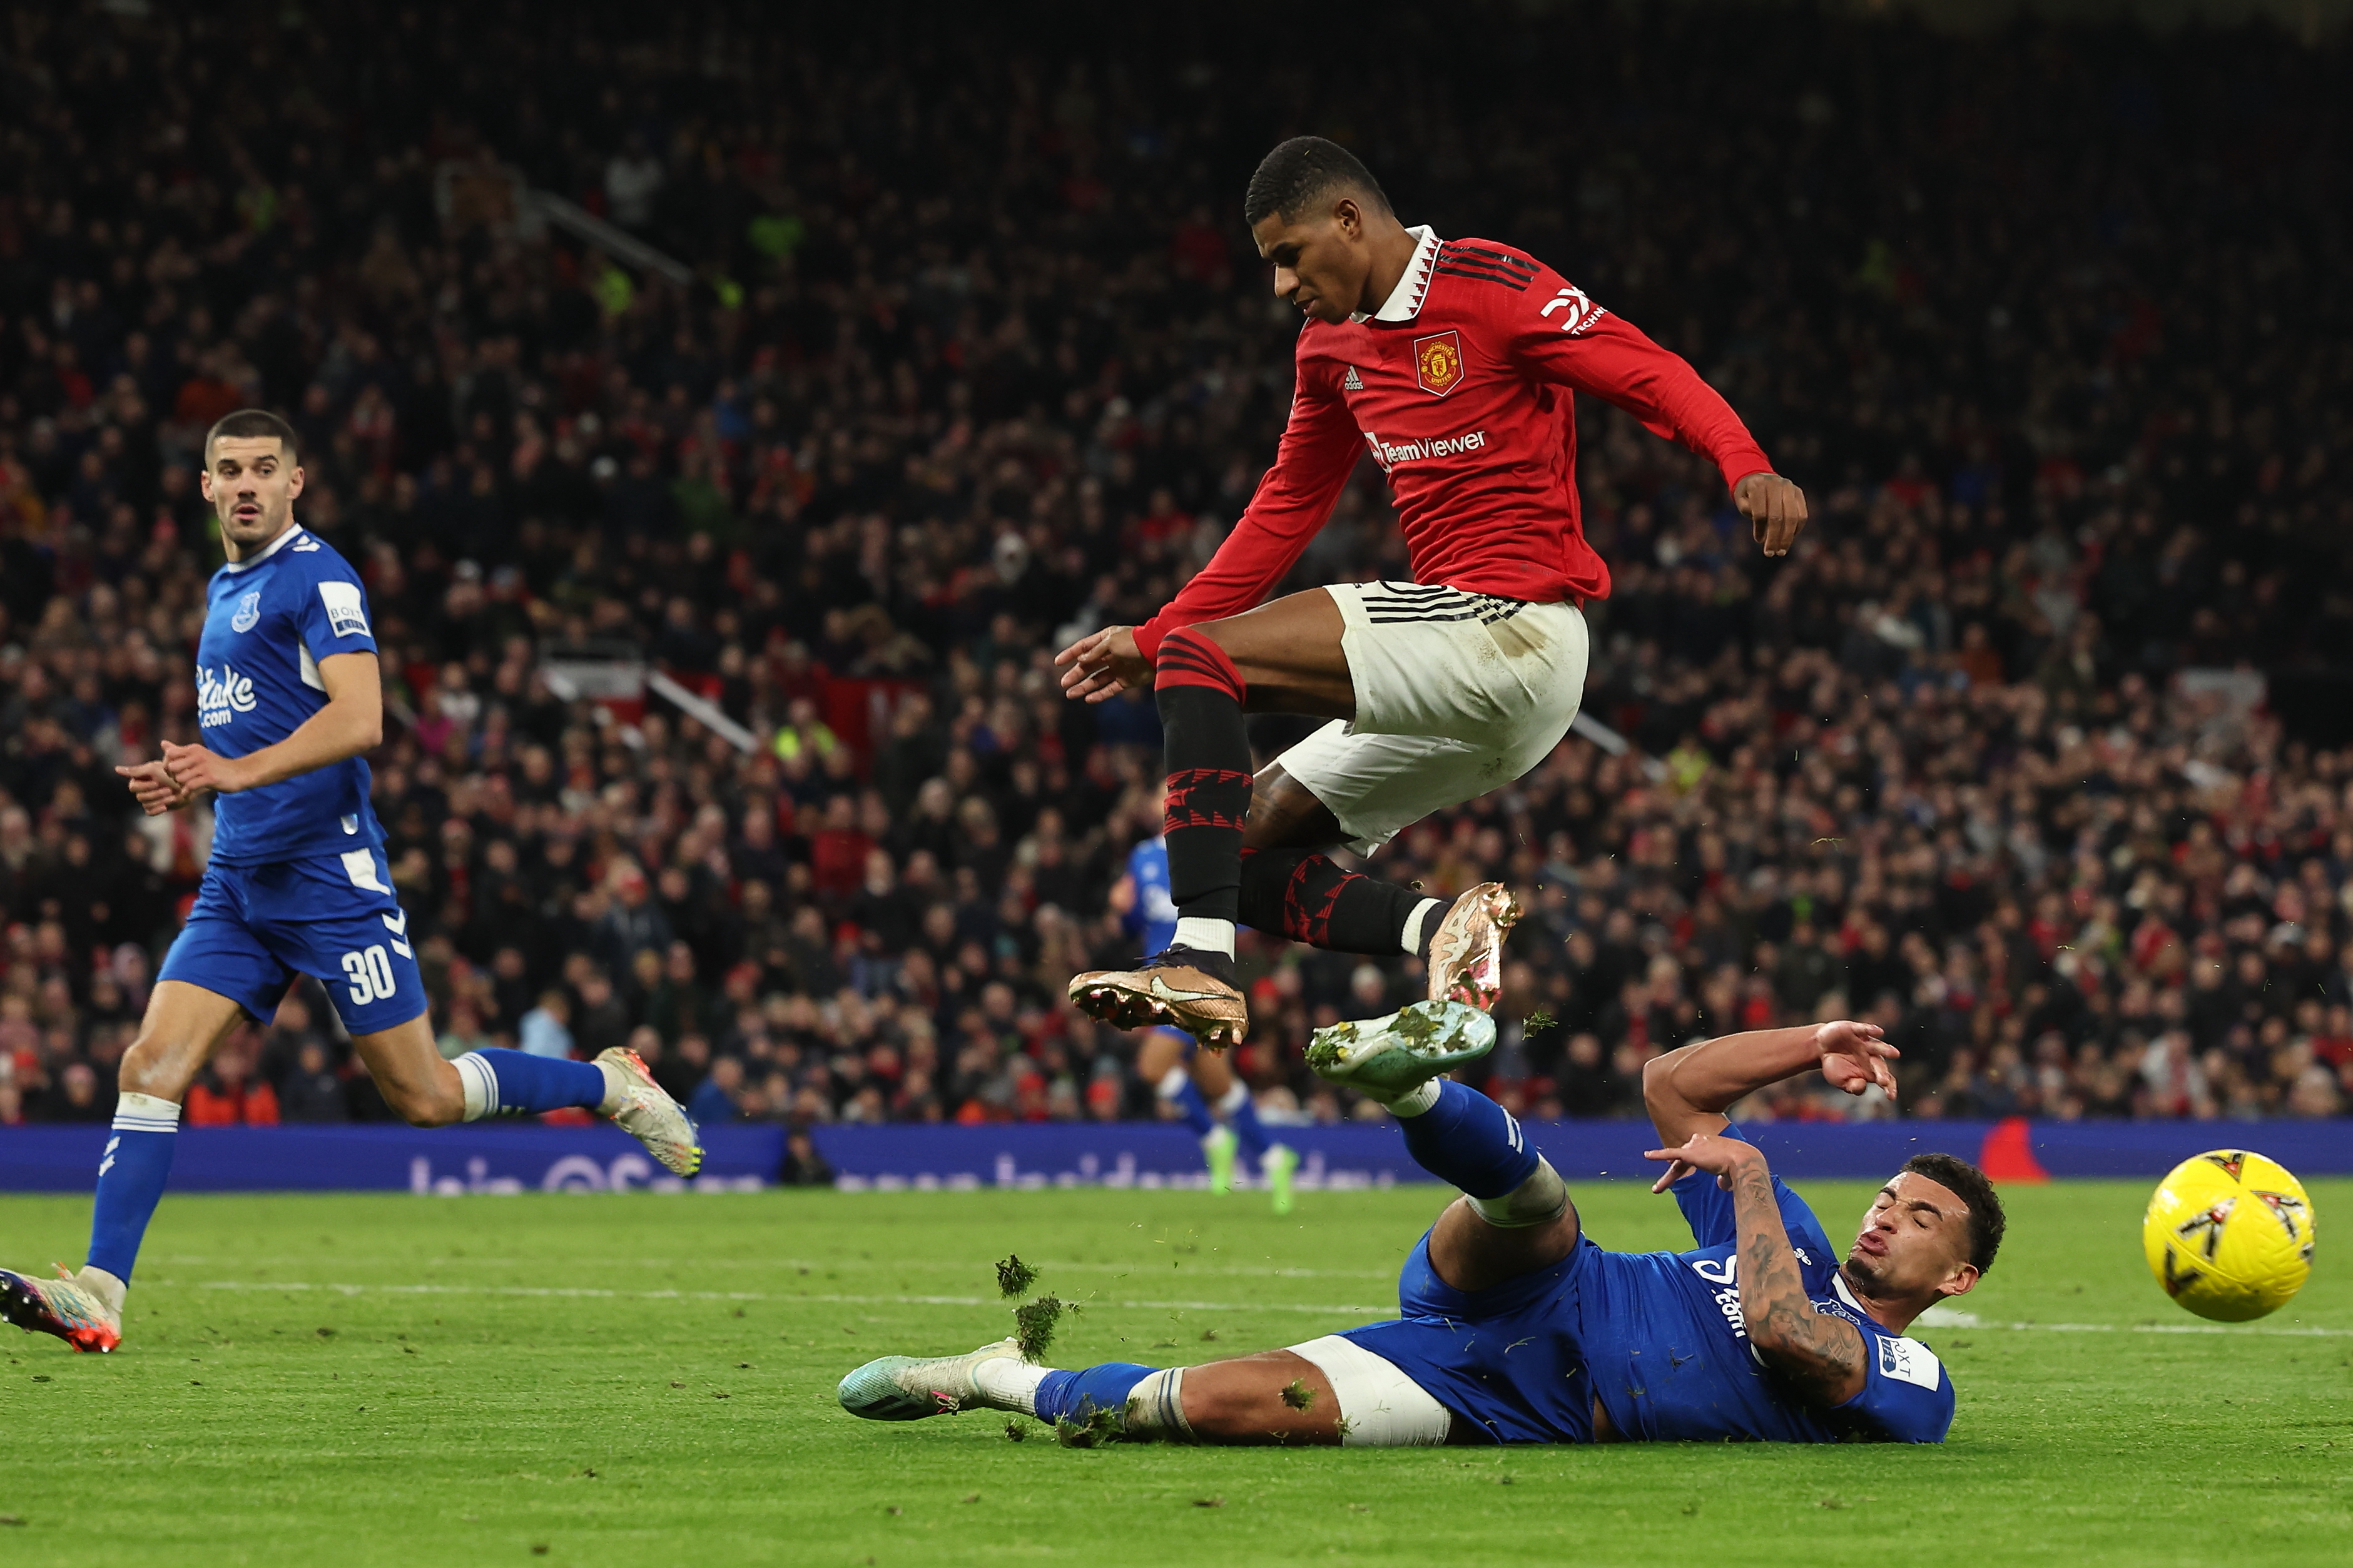 Manchester United v Everton: Emirates FA Cup Third Round